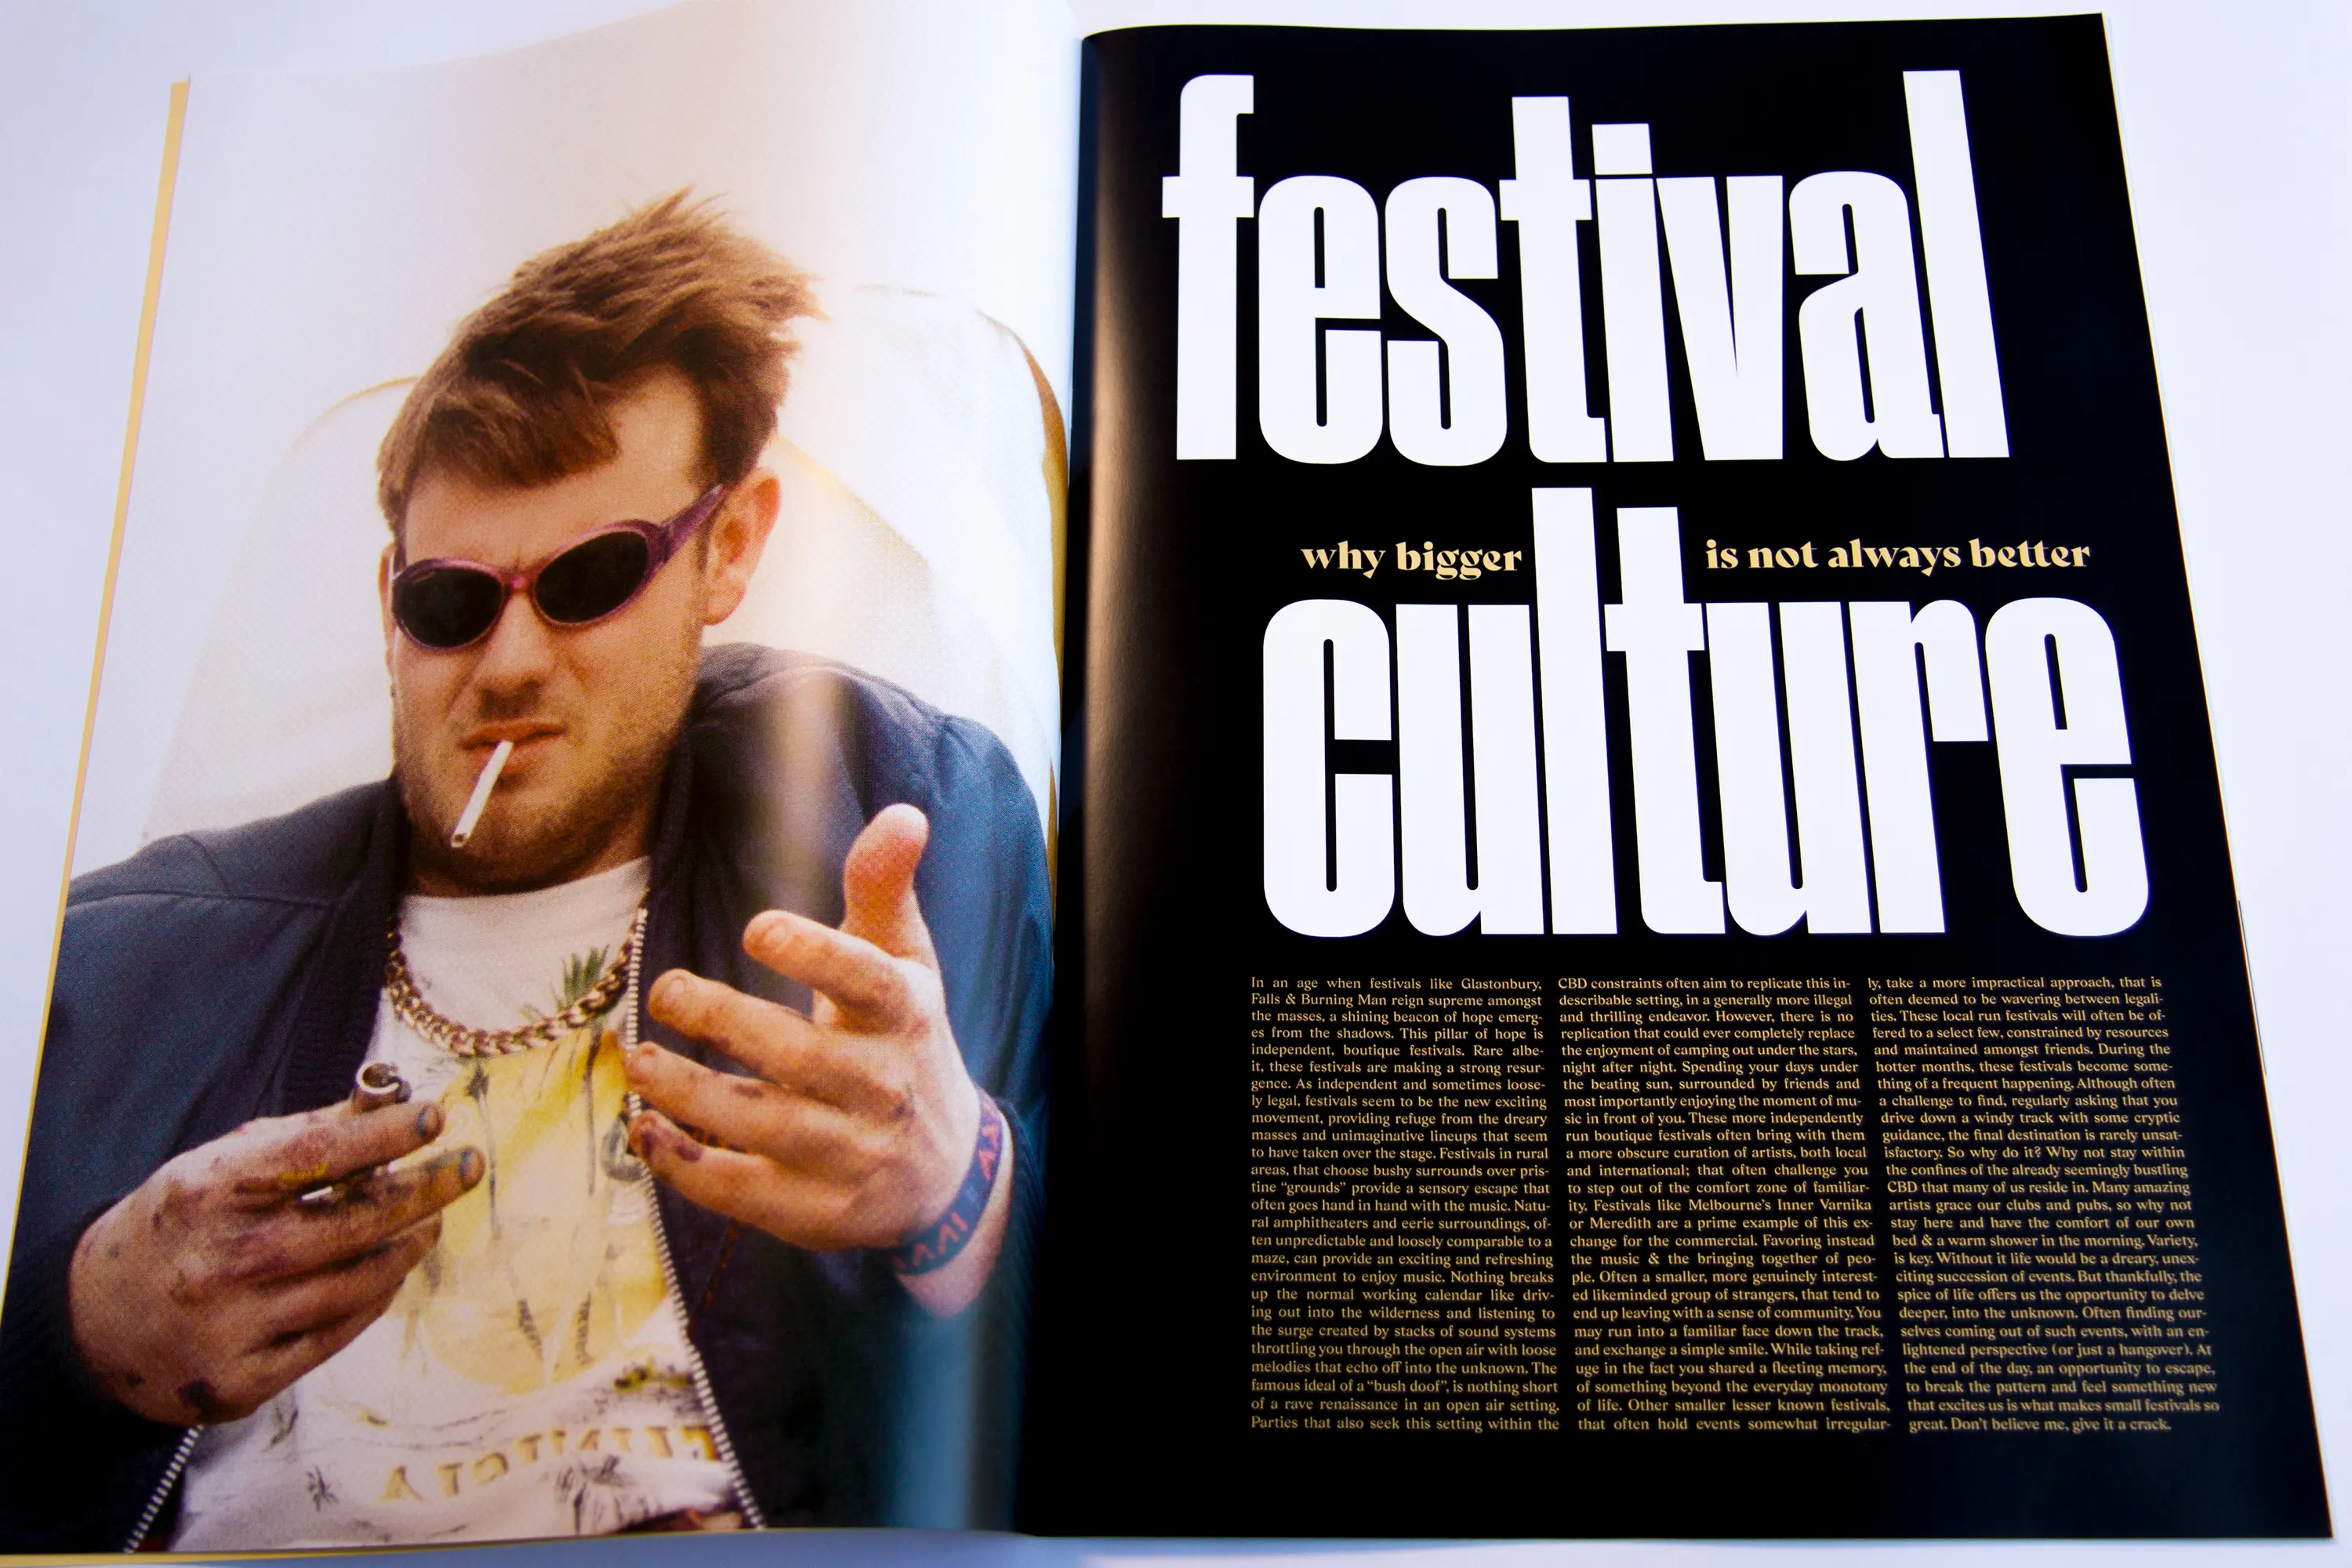 Resonate Magazine - 'festival culture' spread with large text and image of man at festival